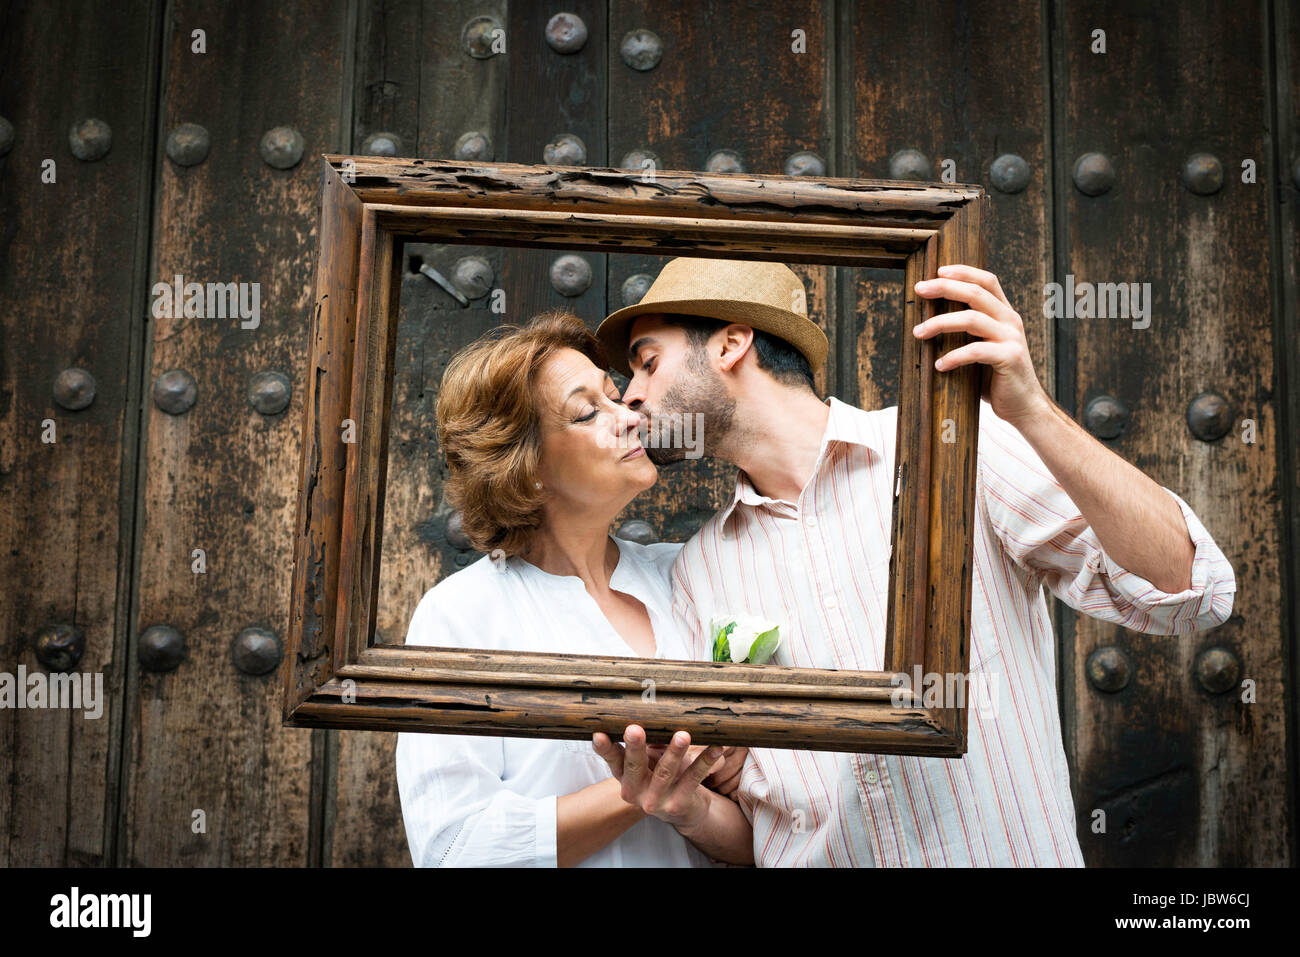 Faces Kissing High Resolution Stock Photography and Images - Alamy